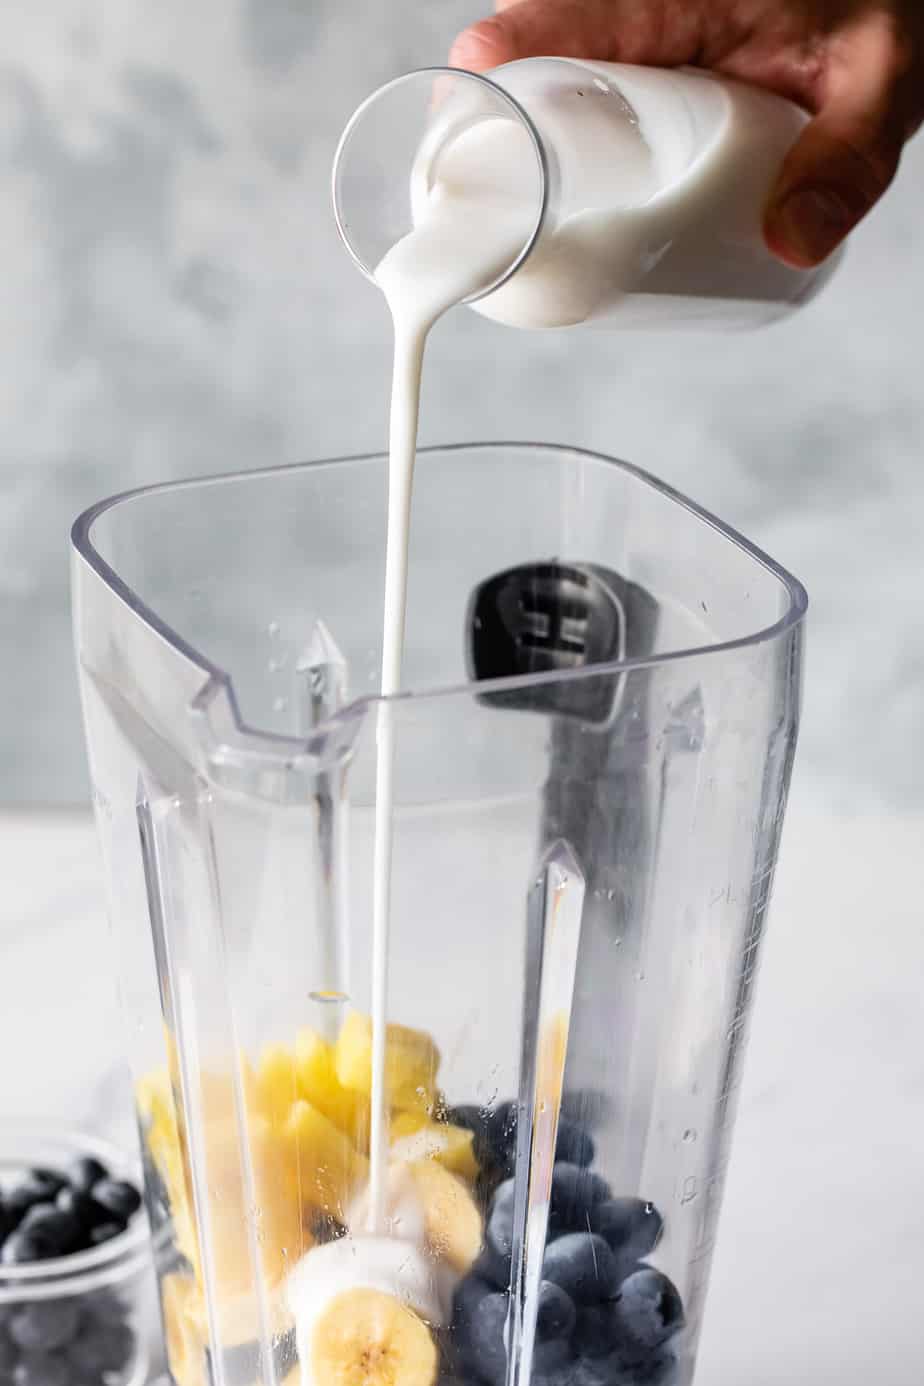 A blender with pineapple and blueberries in it.